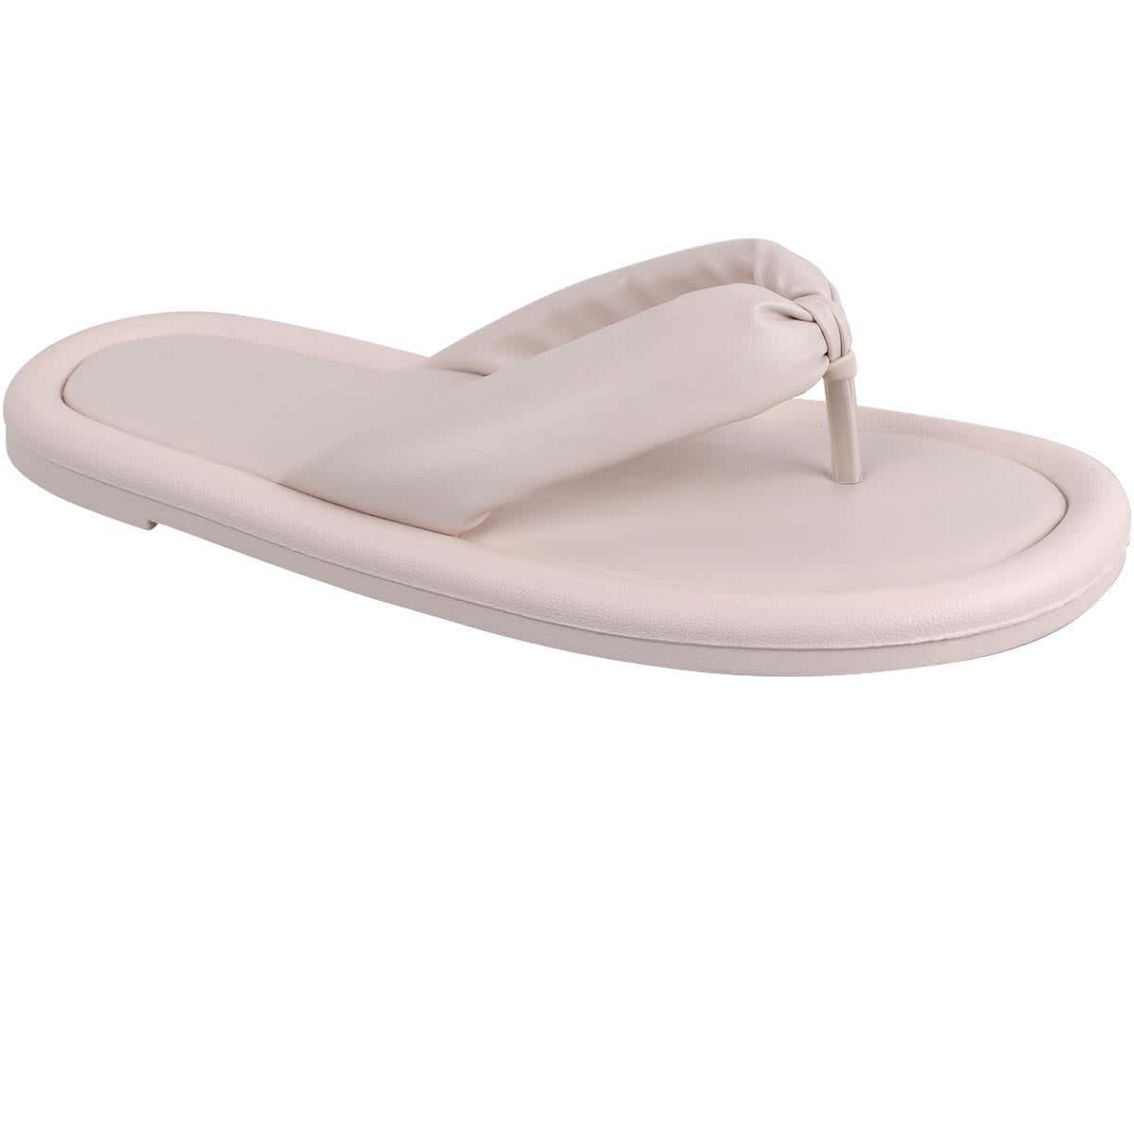 Citizen Womens Vegan Leather Thong Flat Sandals - Image 4 of 4